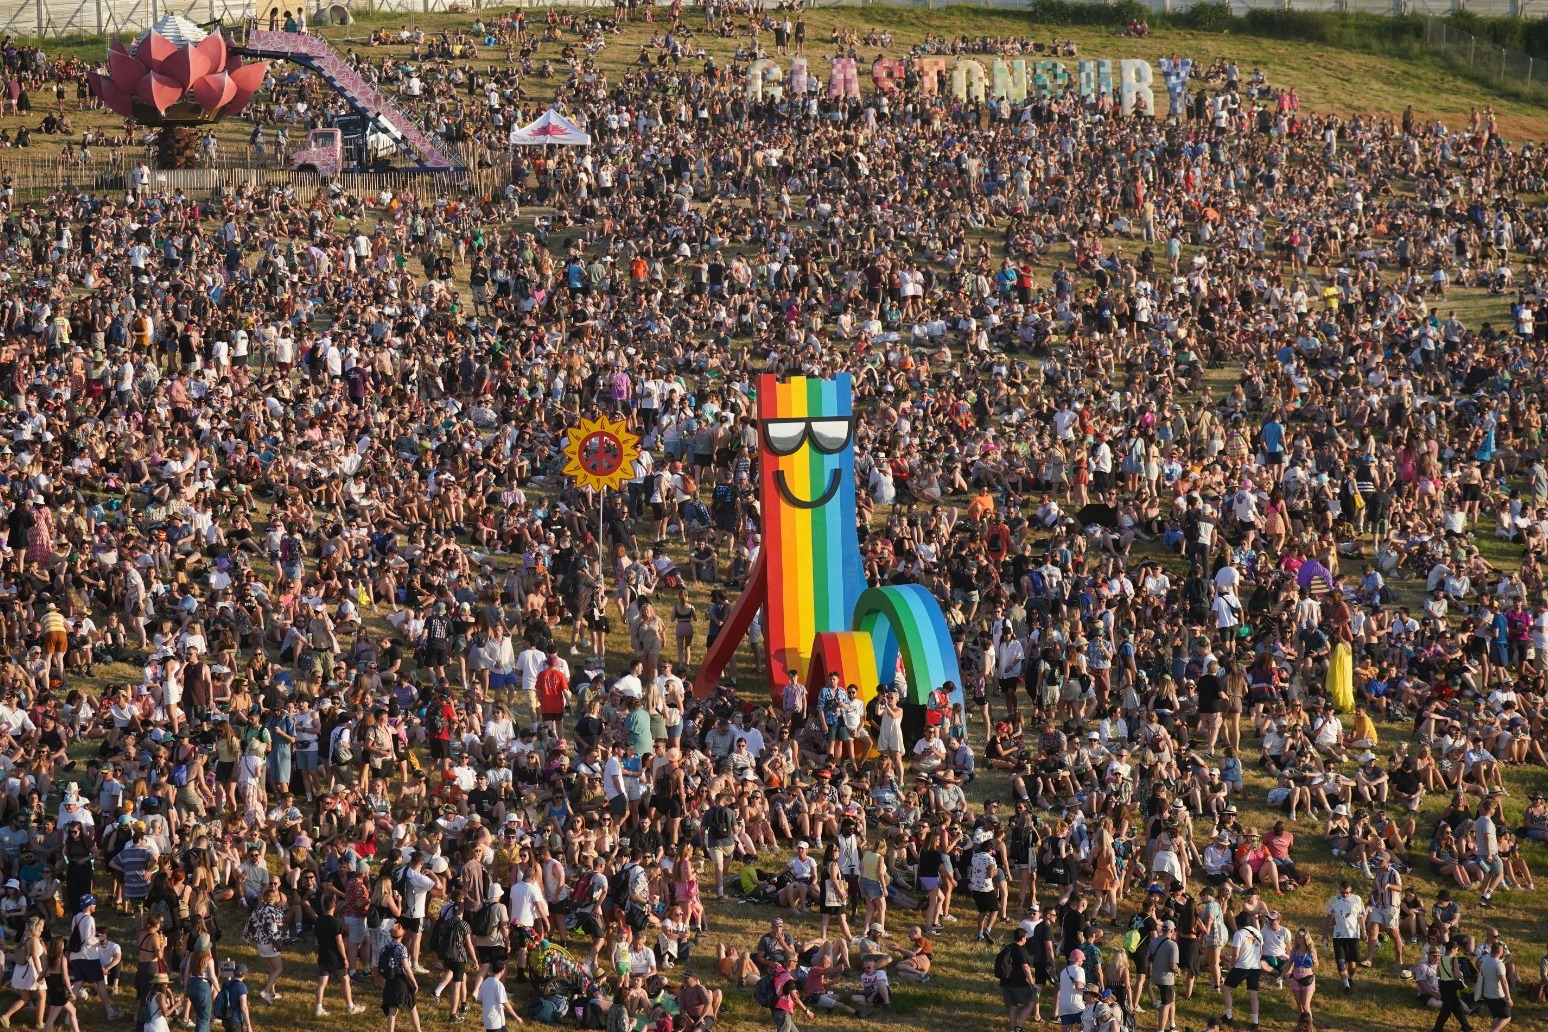 Glastonbury punters may need to take shelter from thunderstorms